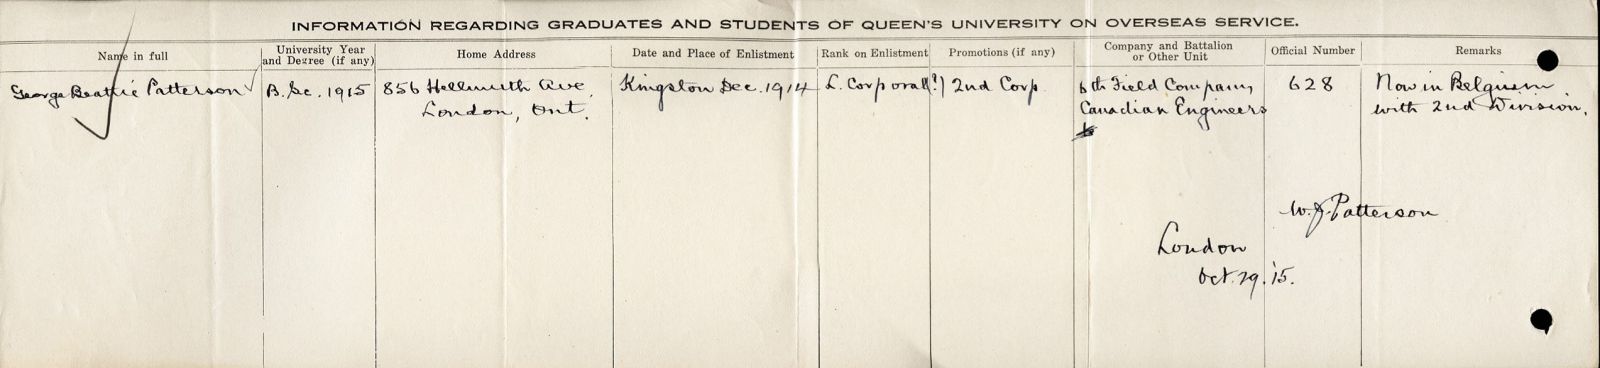 University Overseas Service Record of Patterson